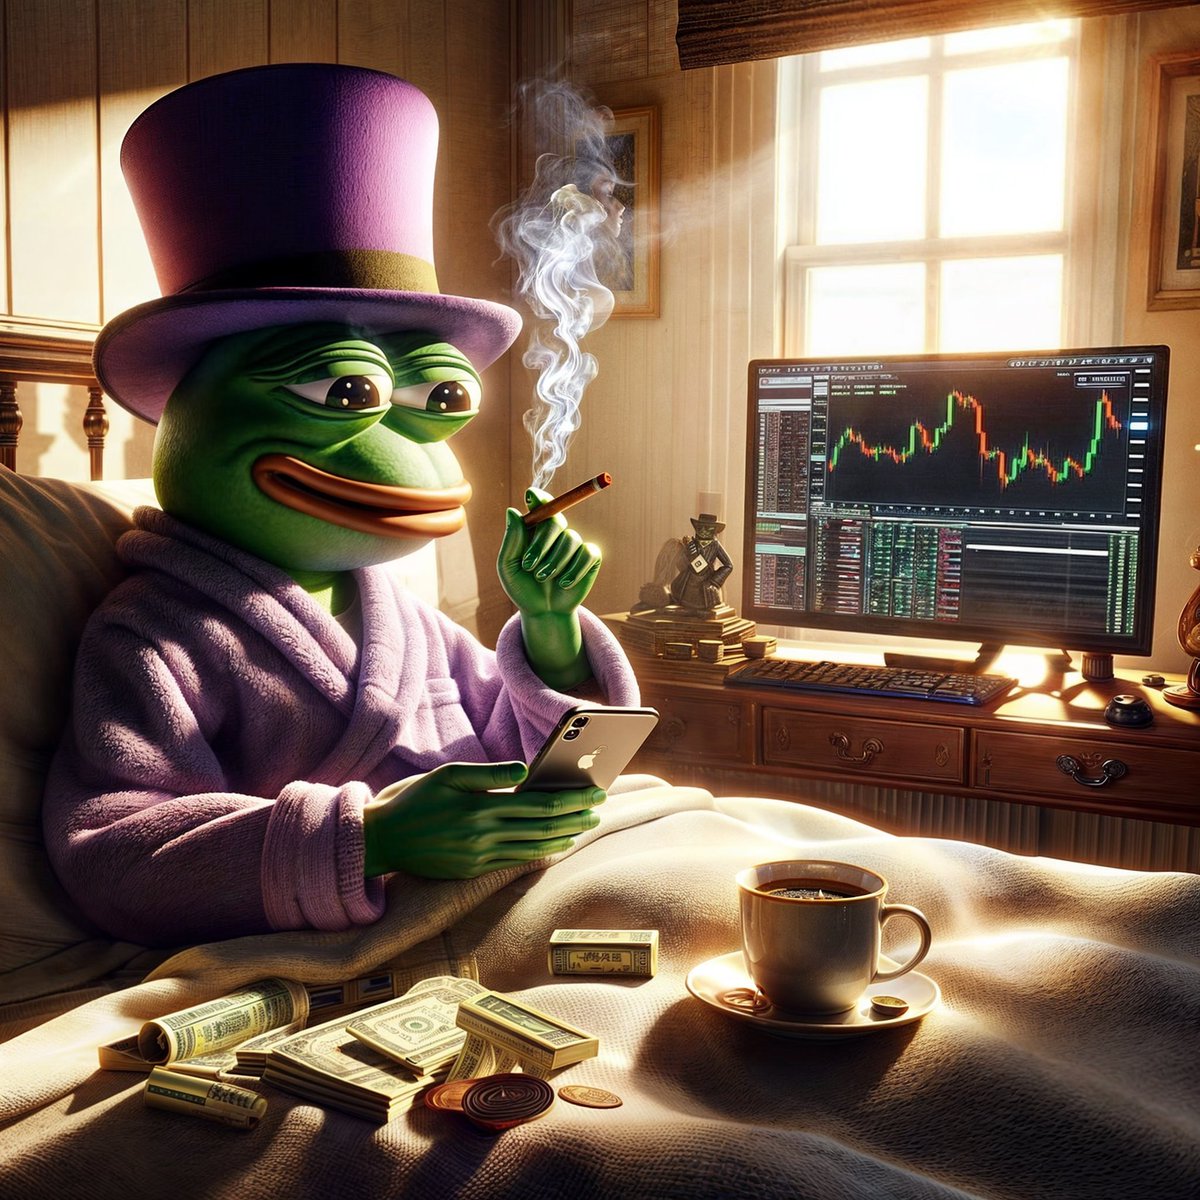 'GM PEPE' is LIVE on @ourZORA ONLY 420 EDITIONS 69 $DEGEN GO GO GO.